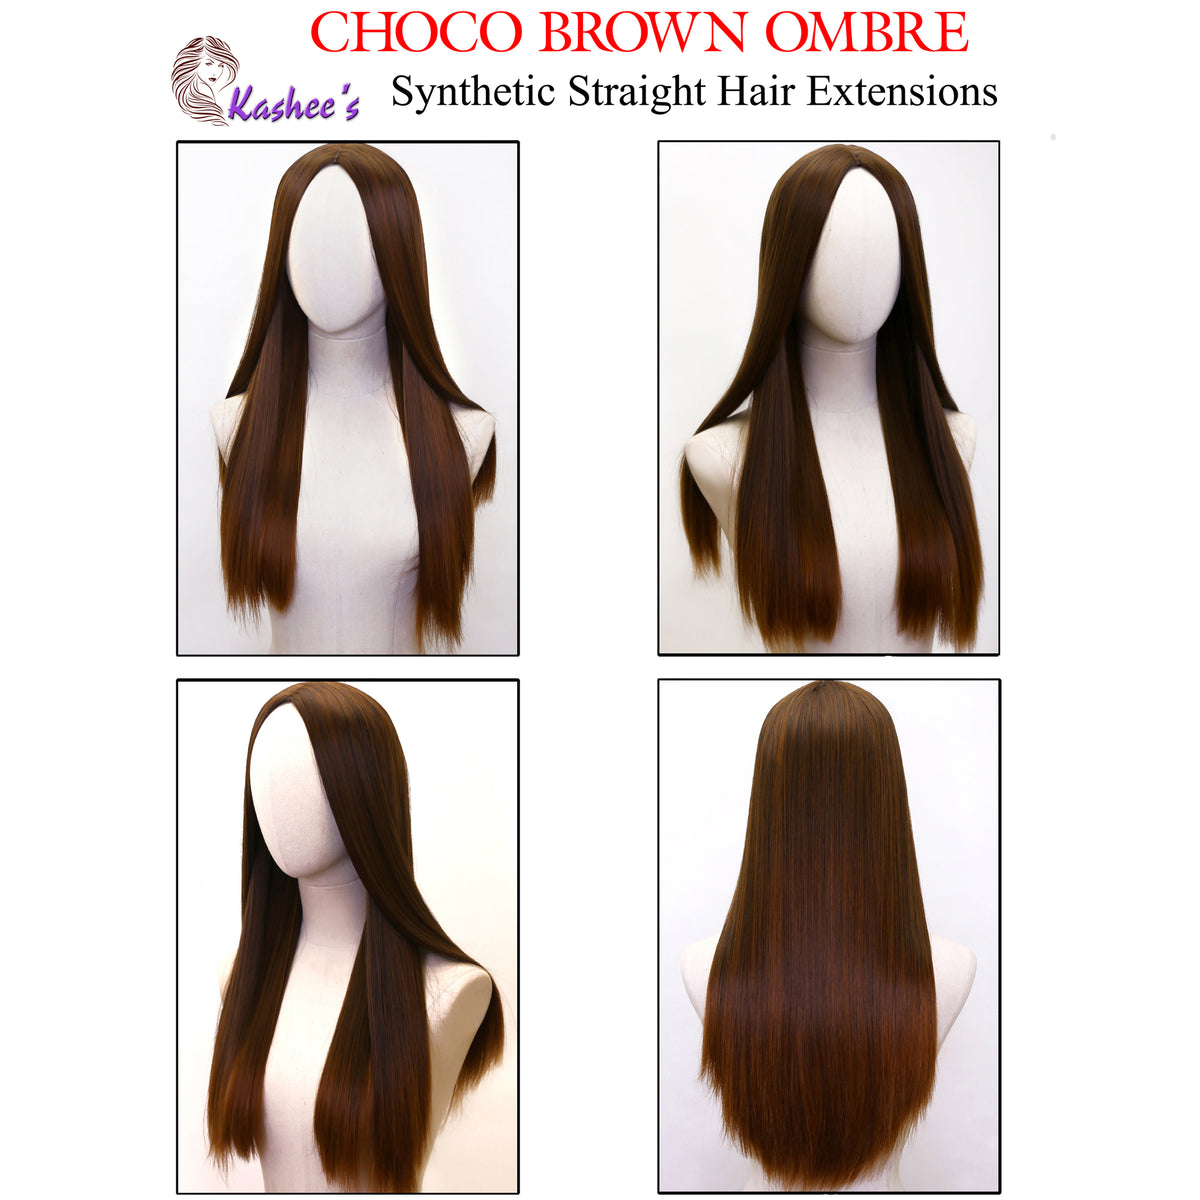 Kashee’s Synthetic Straight Hair Extensions 75% Off